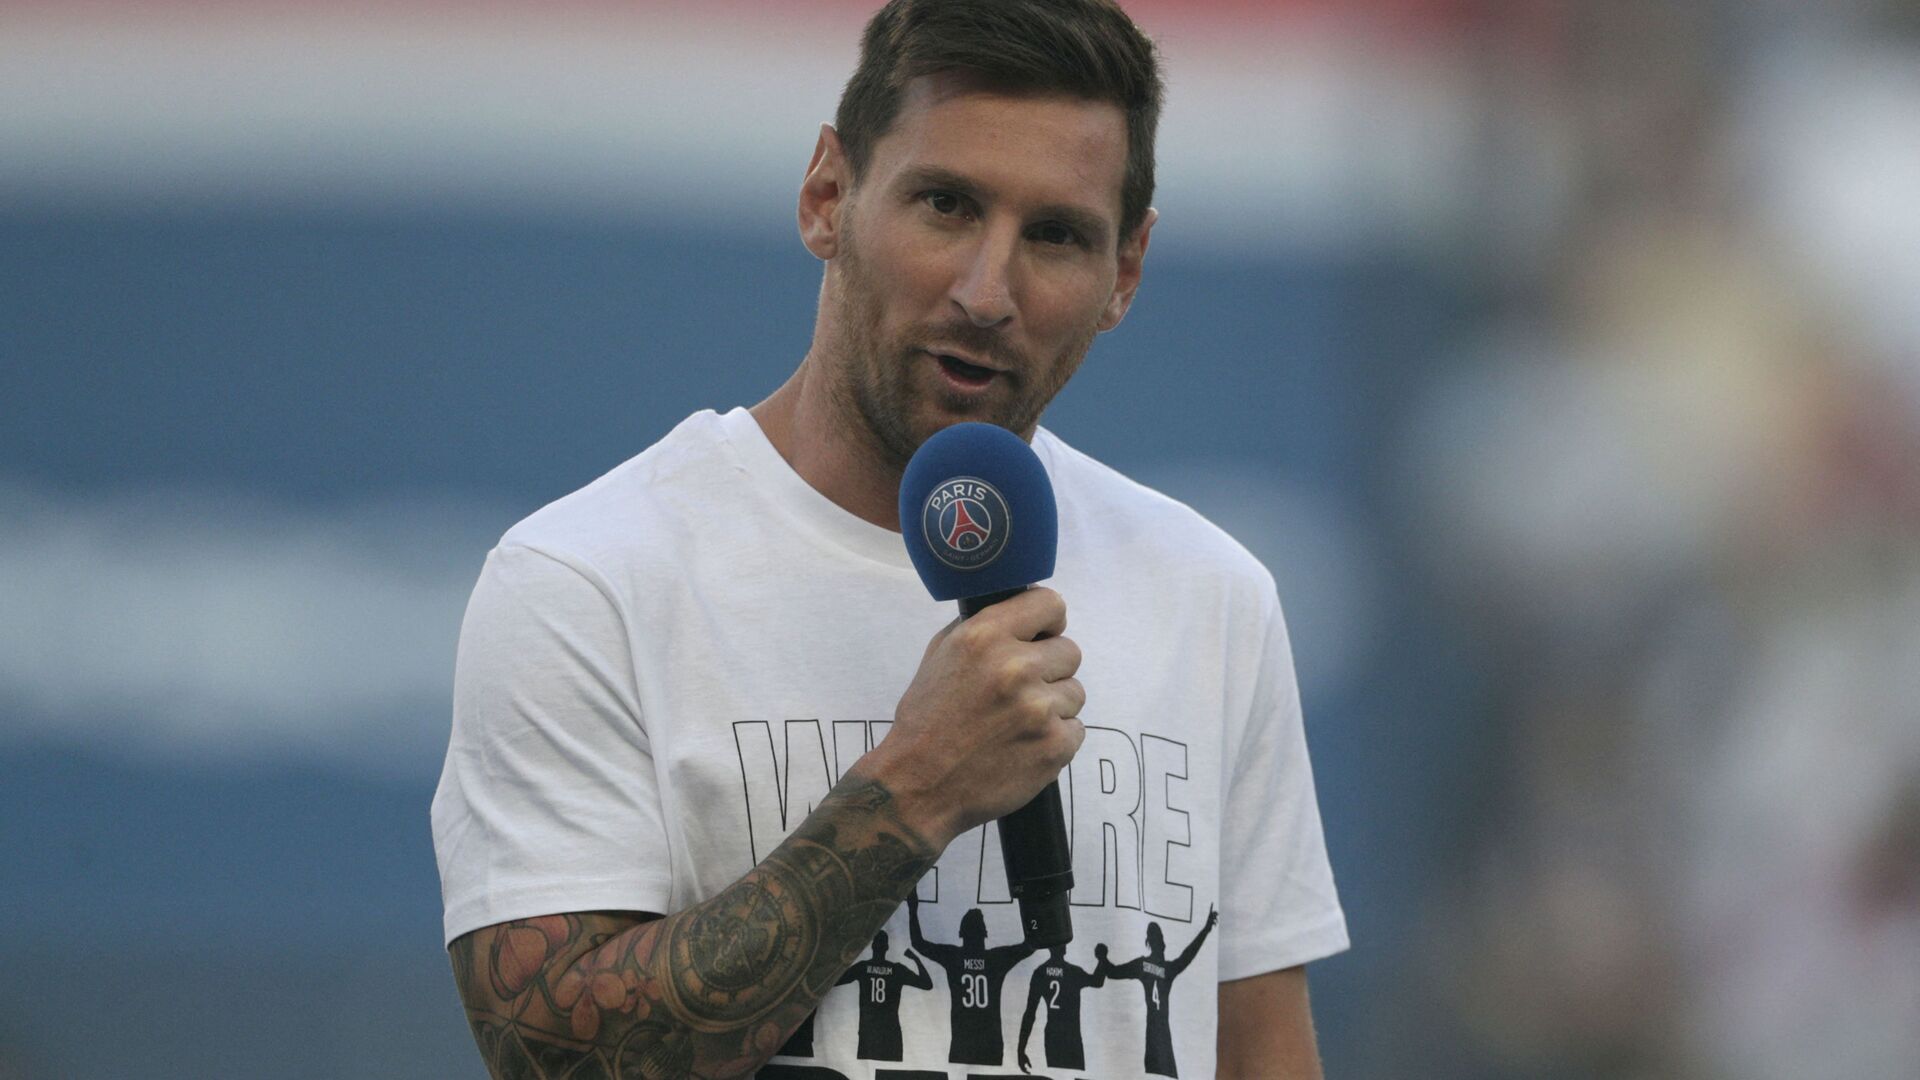 Paris Saint-Germain's Argentinian forward Lionel Messi speaks to the crowd as he is introduced during a presentation ceremony prior to the French L1 football match between Paris Saint-Germain and Racing Club Strasbourg at the Parc des Princes stadium in Paris on August 14, 2021. - Sputnik International, 1920, 23.01.2022